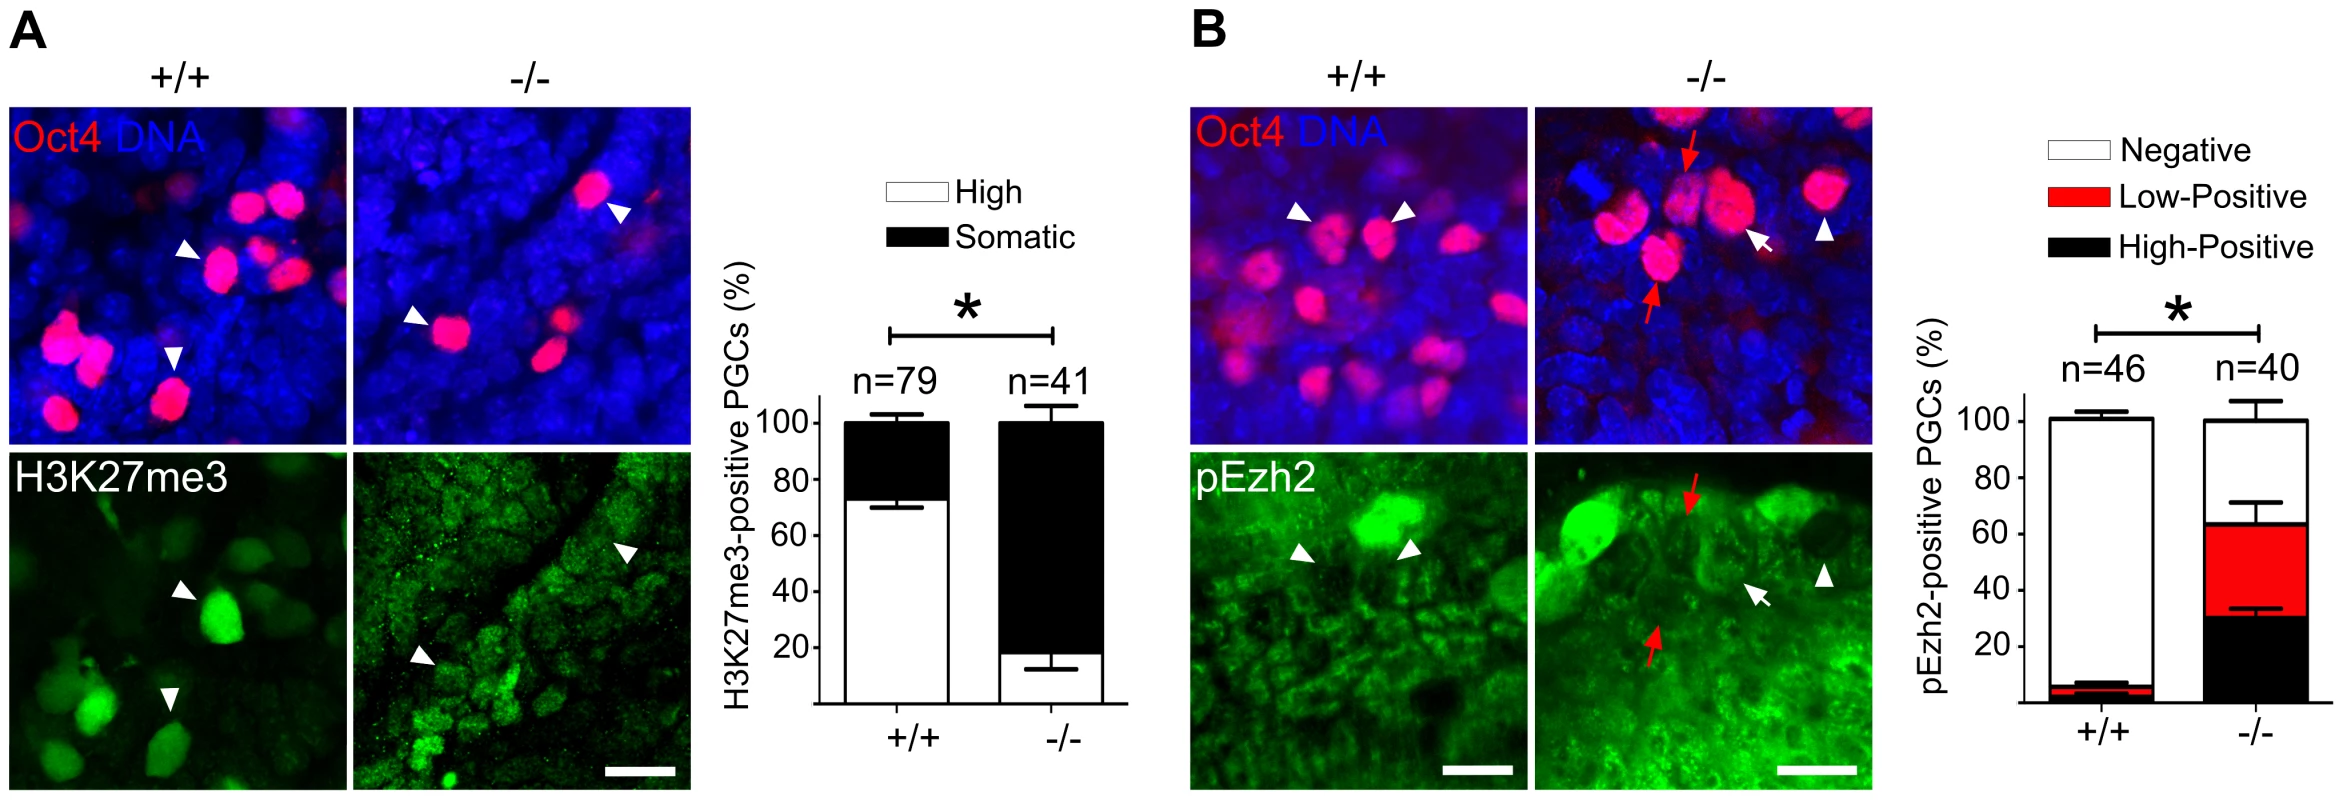 Majority of Mad2l2 deficient PGCs fail to upregulate H3K27me3.